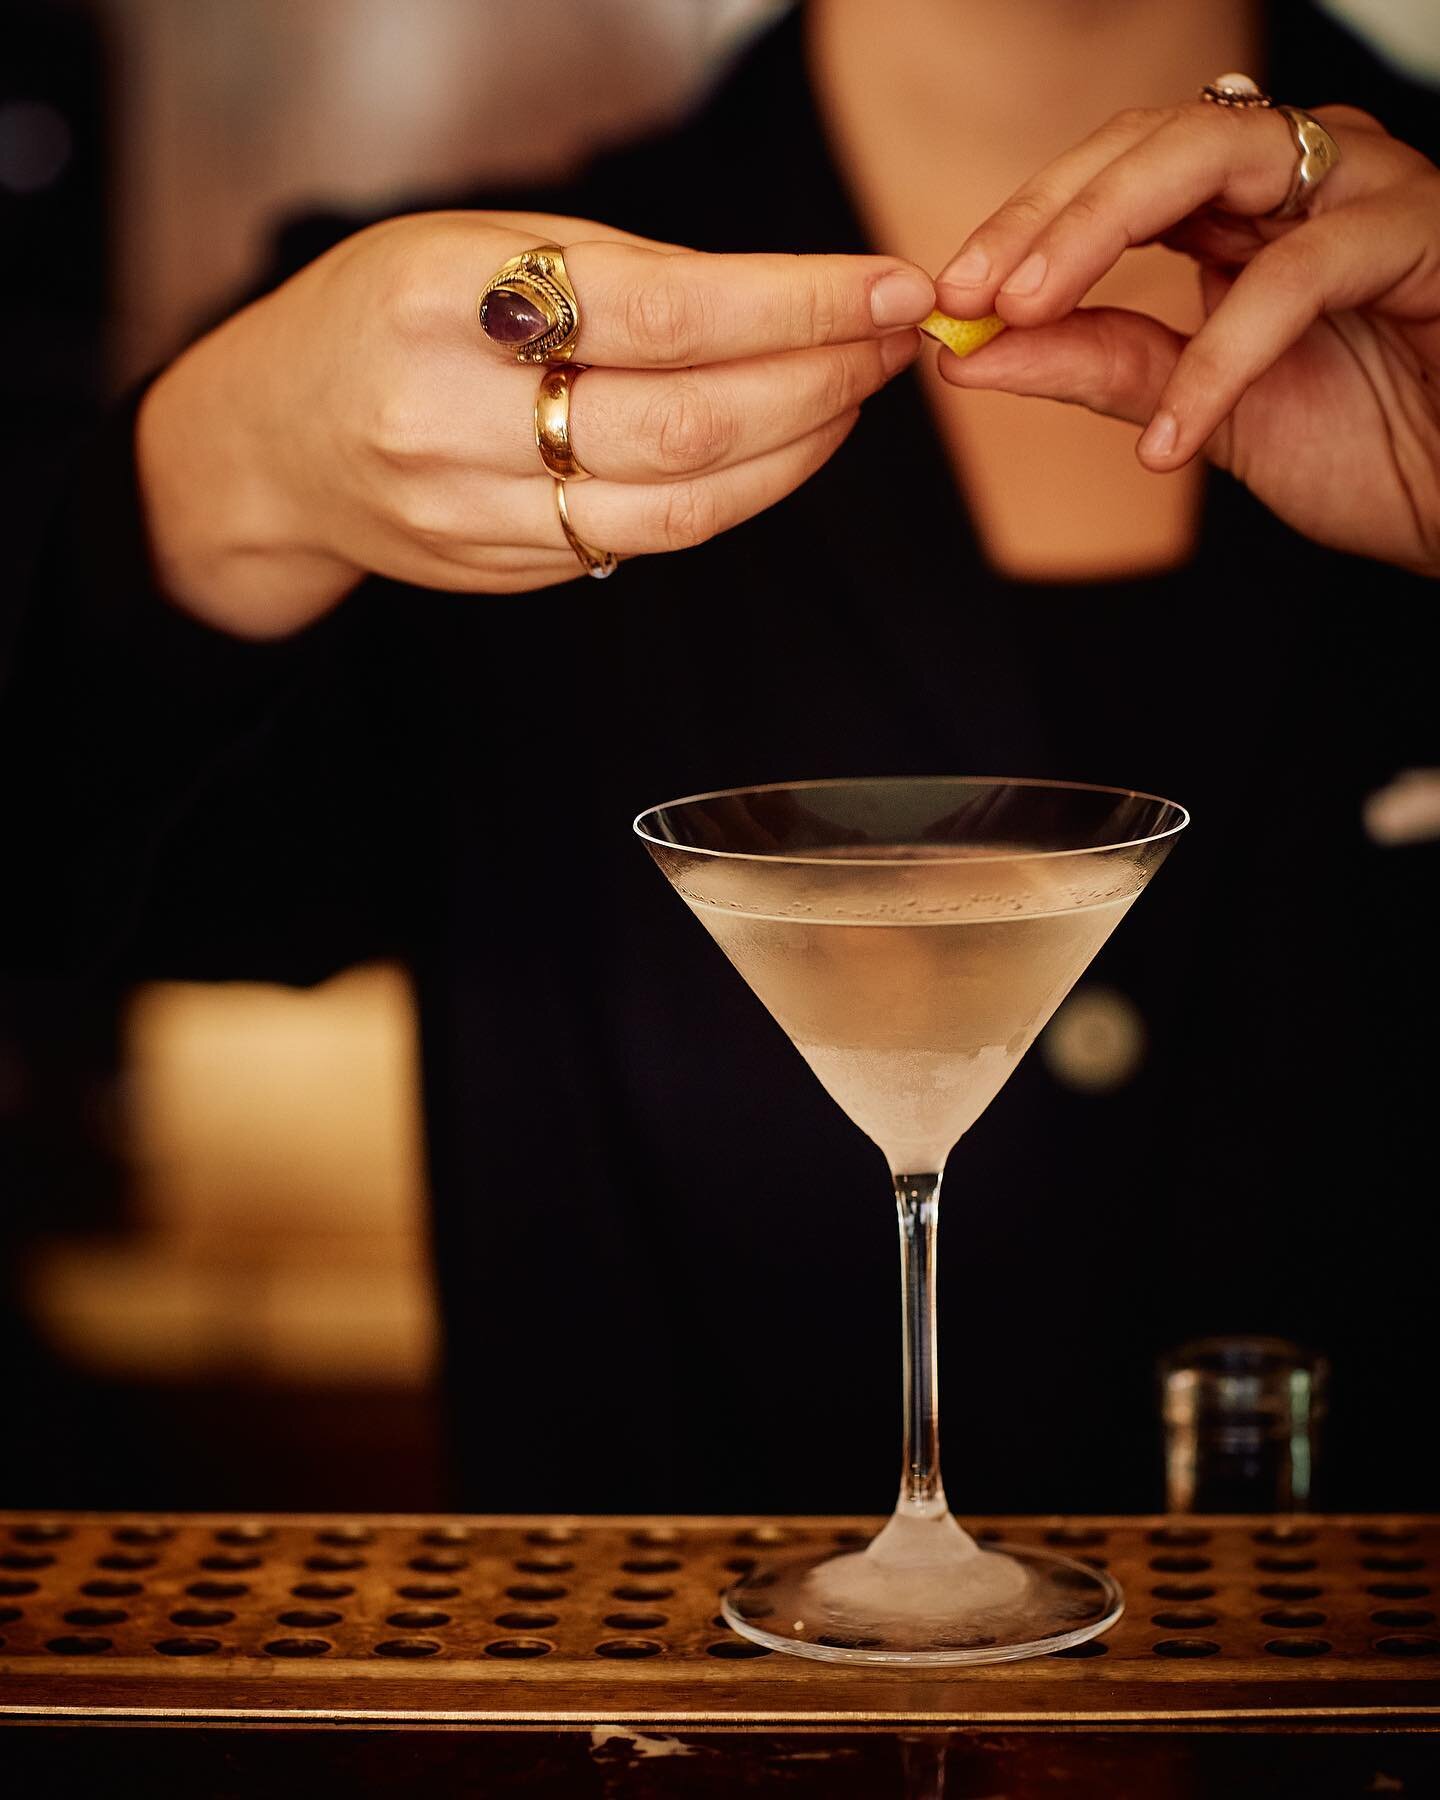 Fridays are for martinis. This particular martini was made with Plymouth Gin, Noilly Prat dry vermouth, and a twist. We&rsquo;re quite partial to an olive or two and a splash of their brine. Dry please, but not _too_ dry. We like to know the vermouth